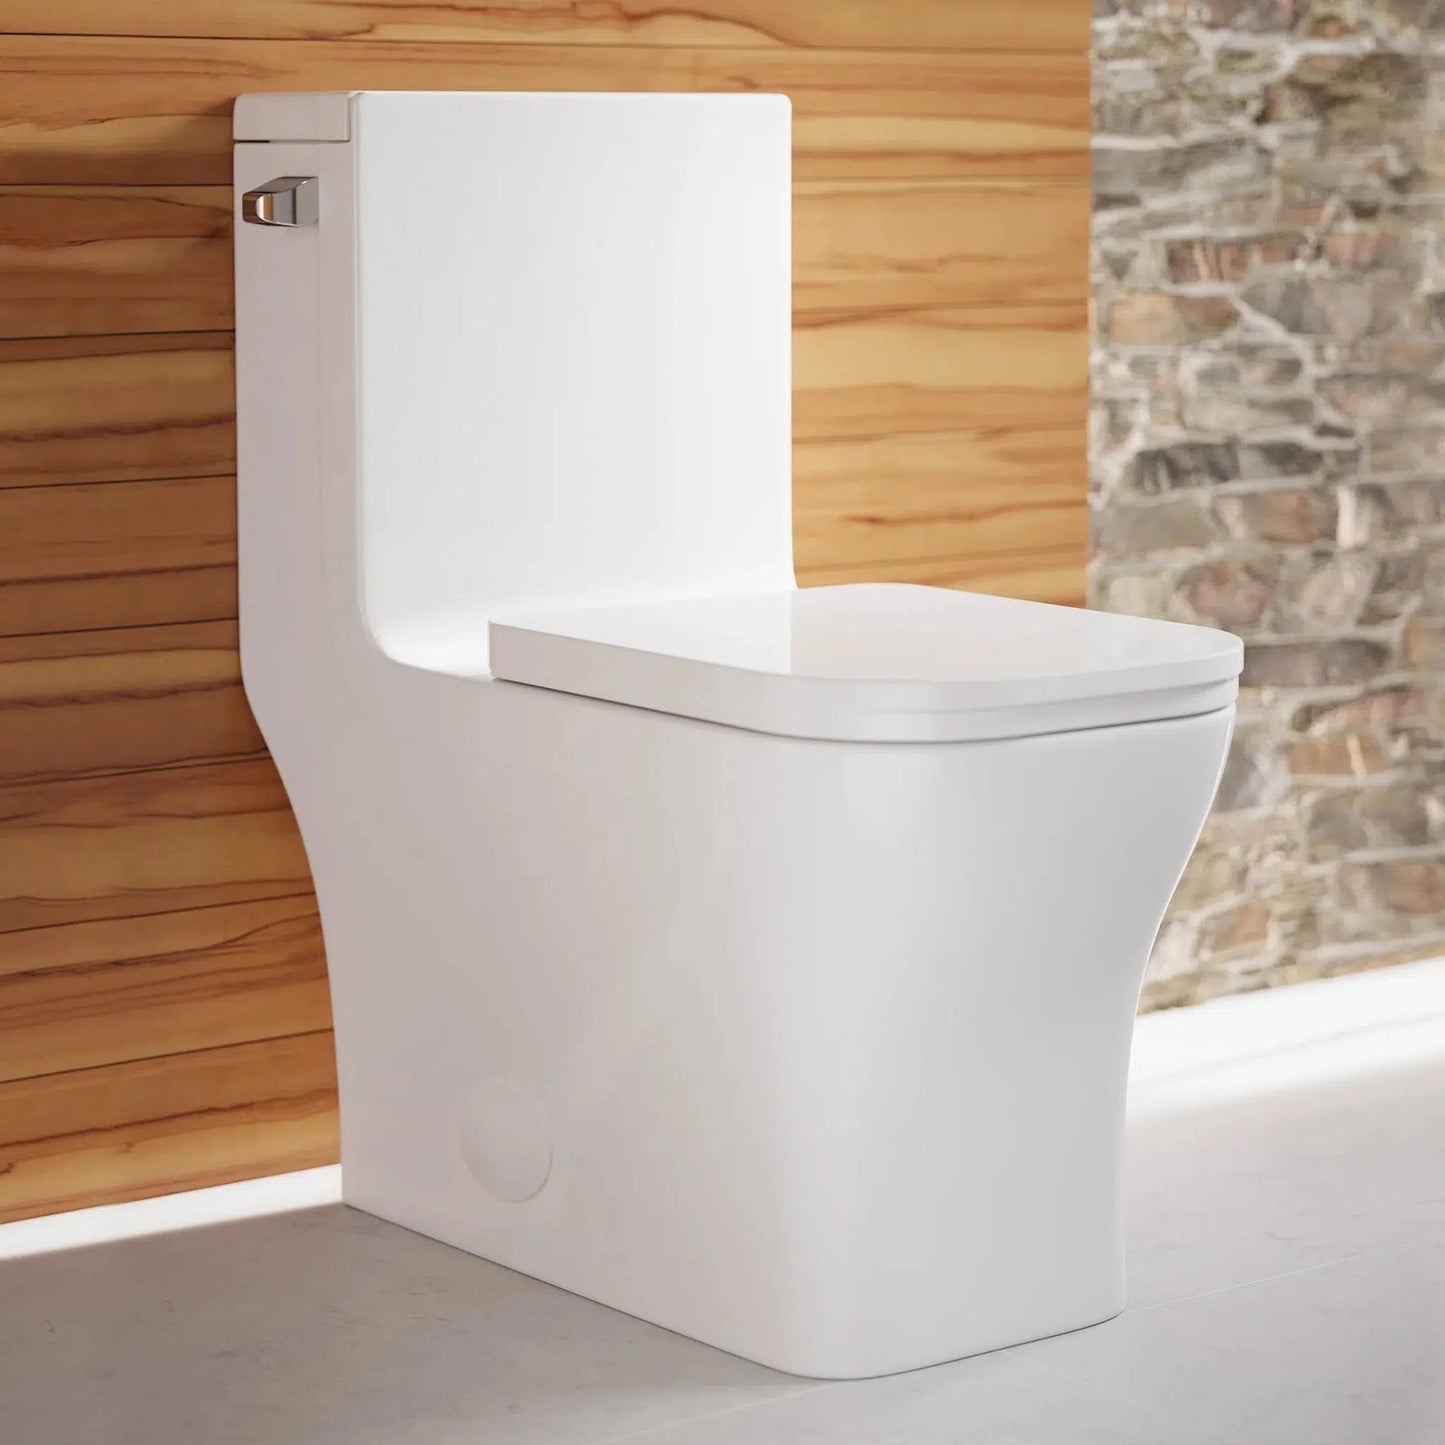 Swiss Madison Concorde 14" x 29" Glossy White One-Piece Elongated Square Floor Mounted Toilet With 1.28 GPF Side Flush Function